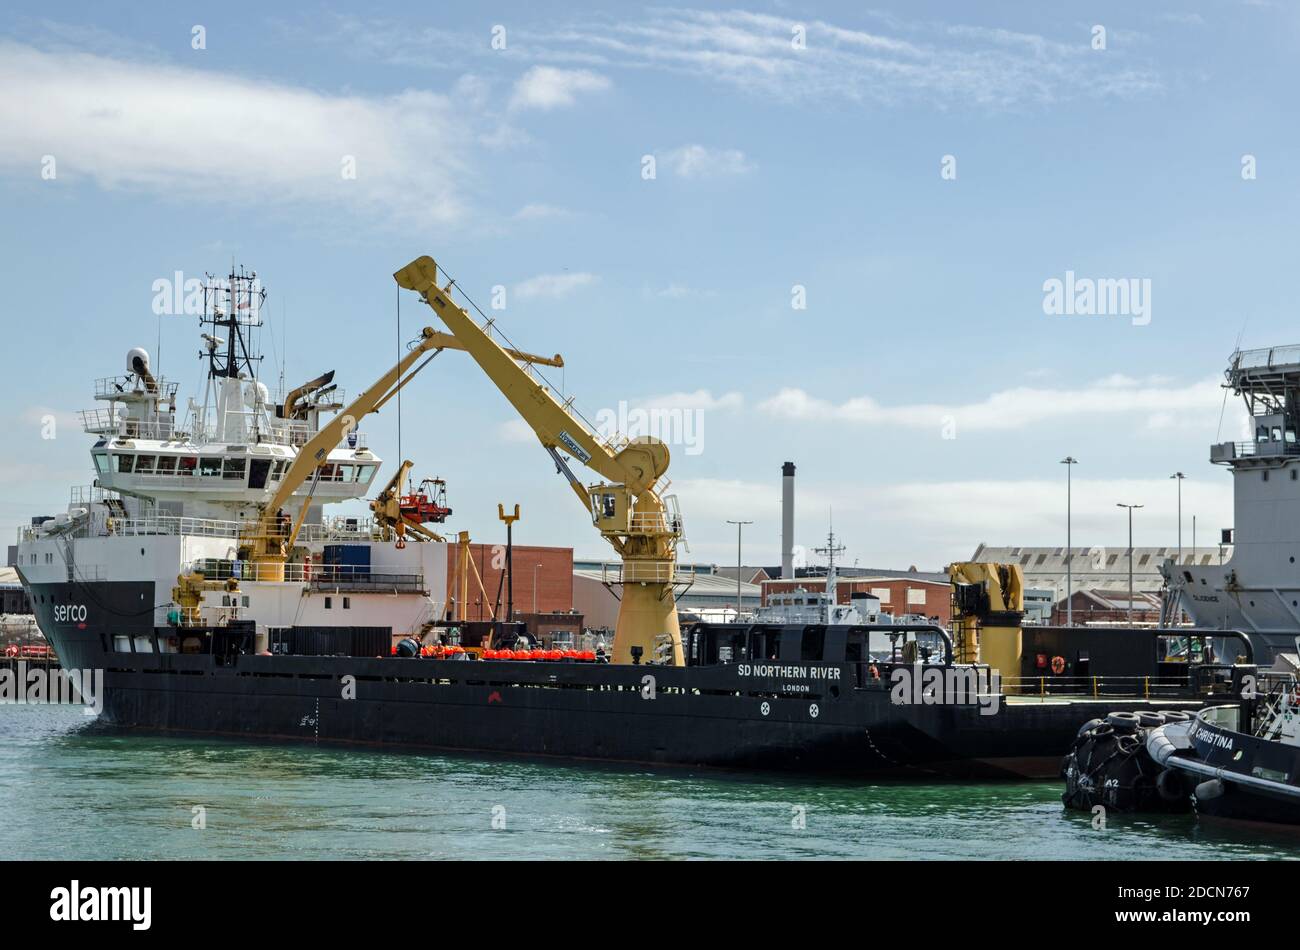 Portsmouth, UK - September 8, 2020:  The Serco operated marine services auxilliaryship SD Northern River, part of the Royal Navy's submarine rescue se Stock Photo